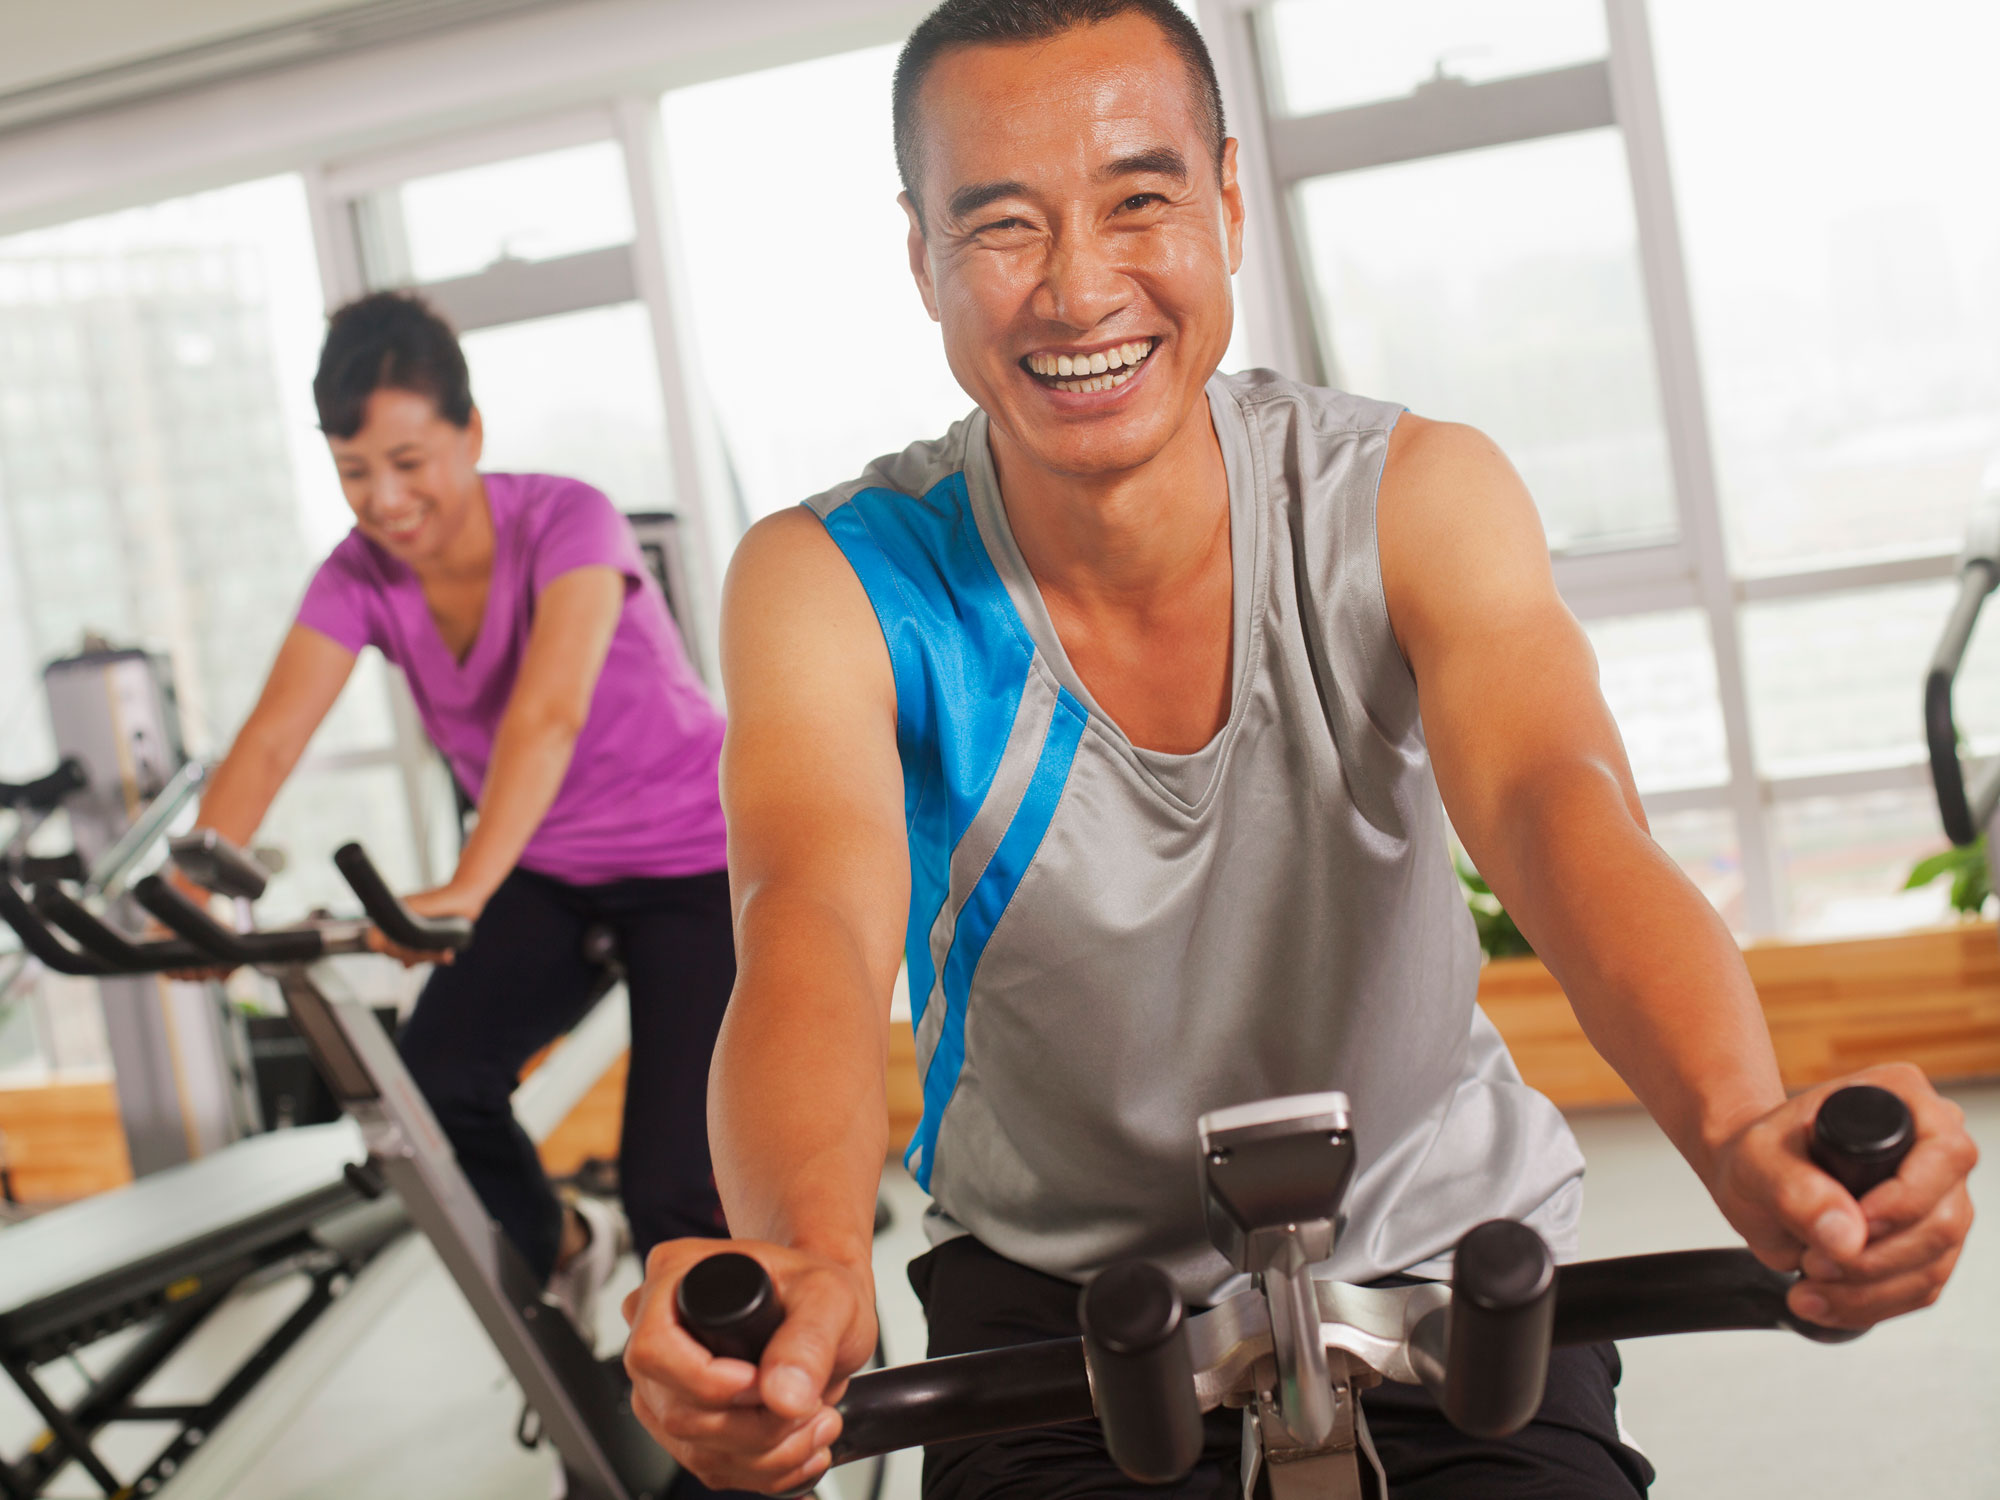 Get better gut health at the gym